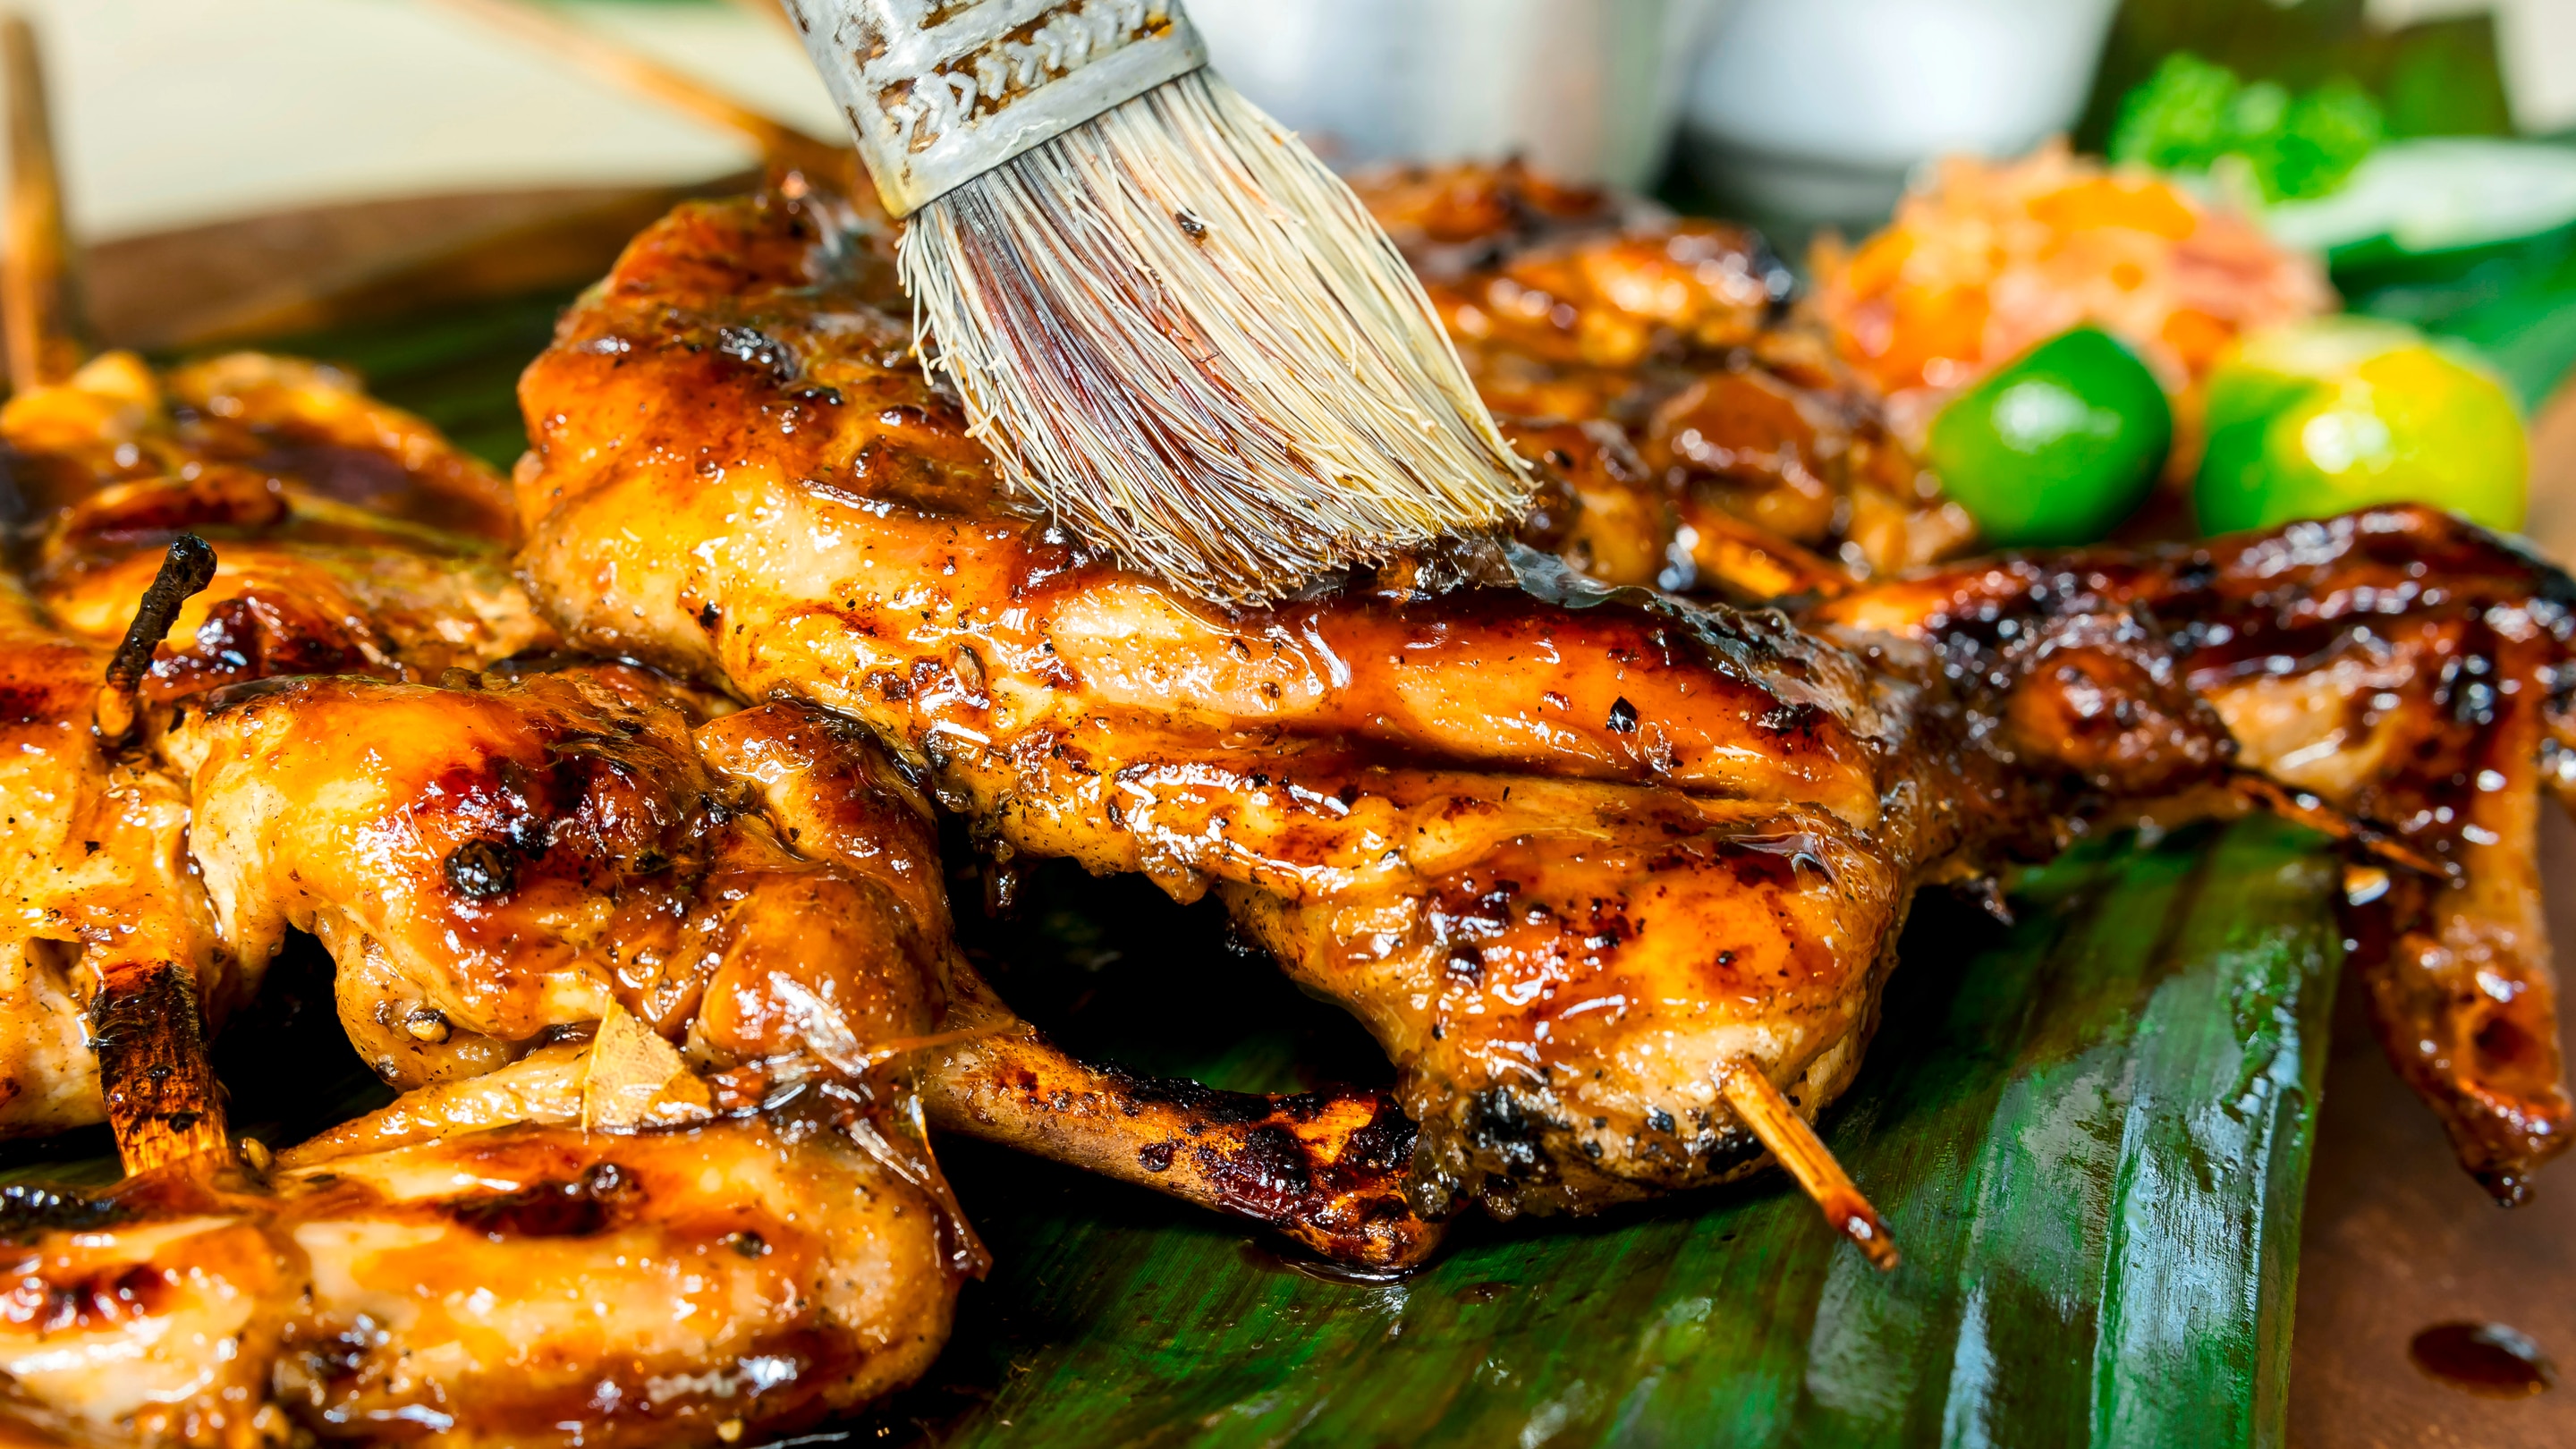 Grilled chicken pieces on a banana leaf get final basting before it is served